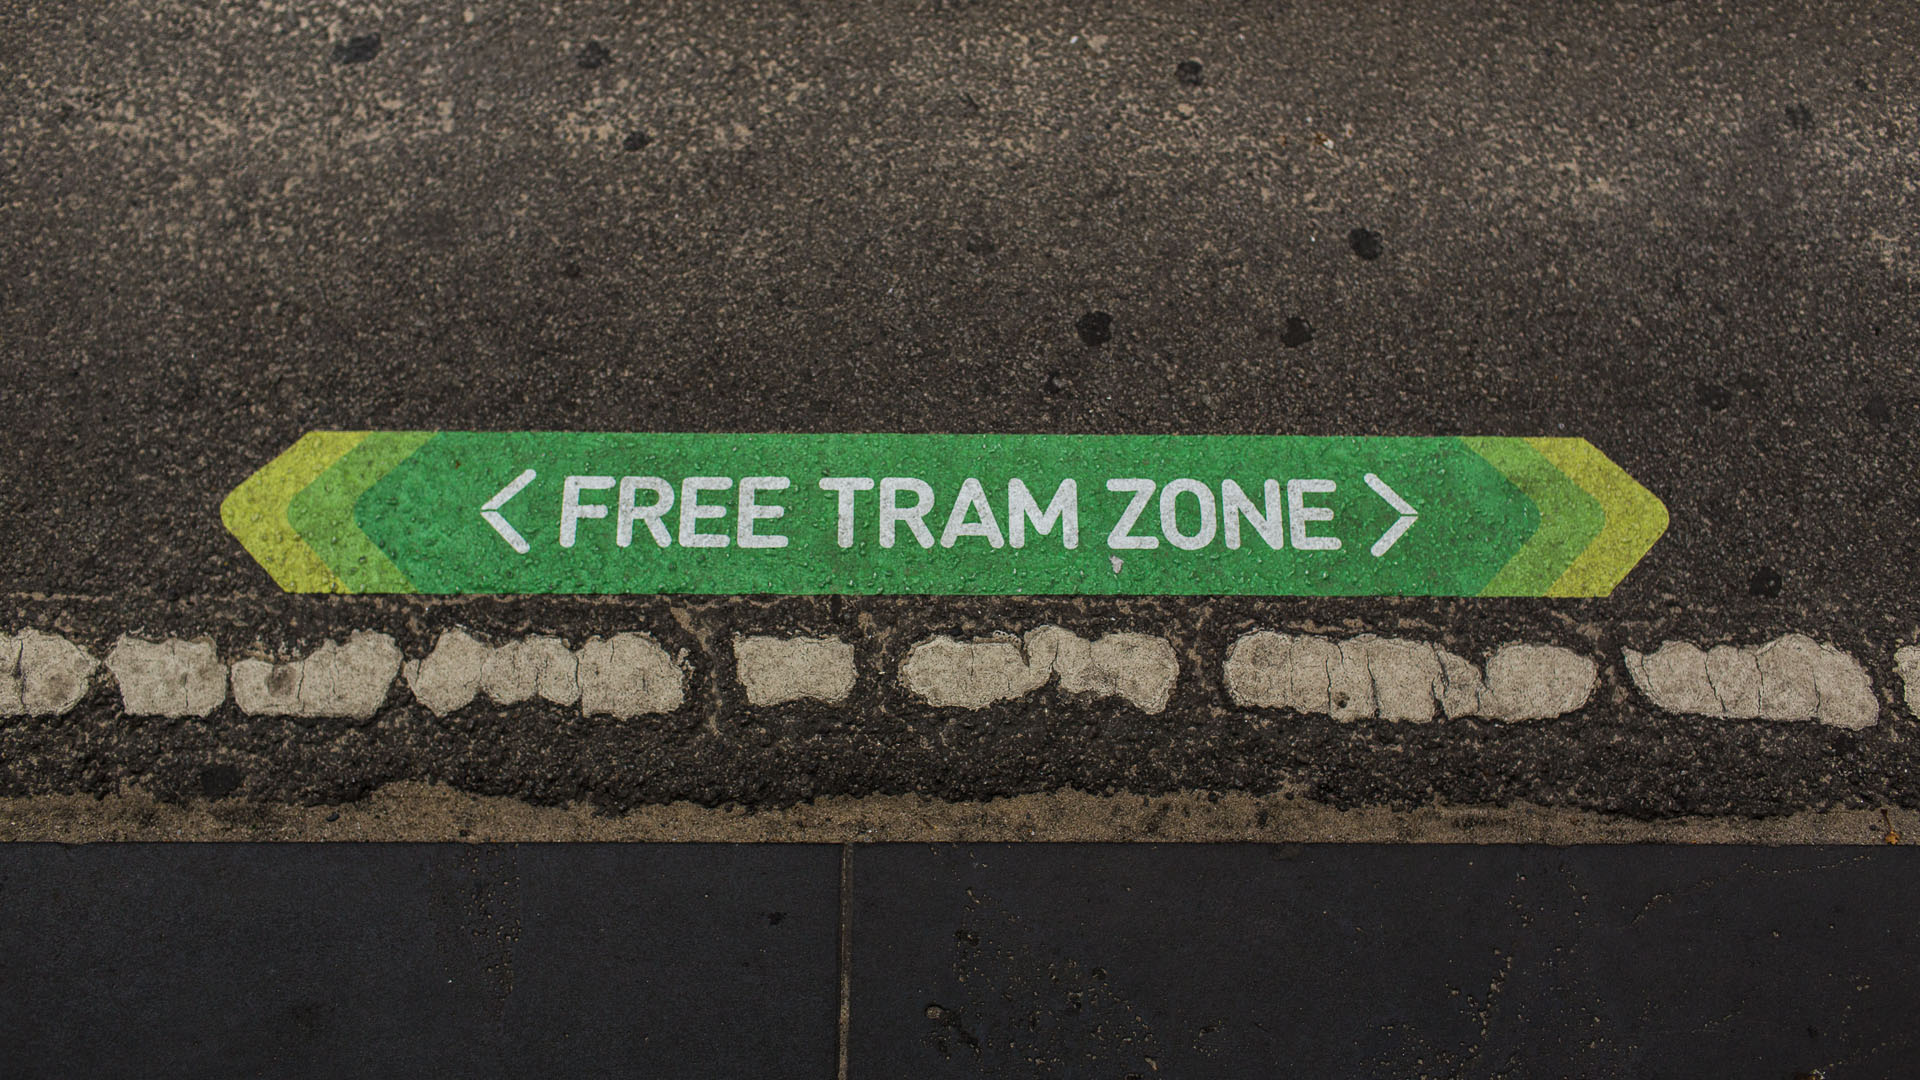 Free Tram Zone Delivering Unexpected Results for Yarra Trams